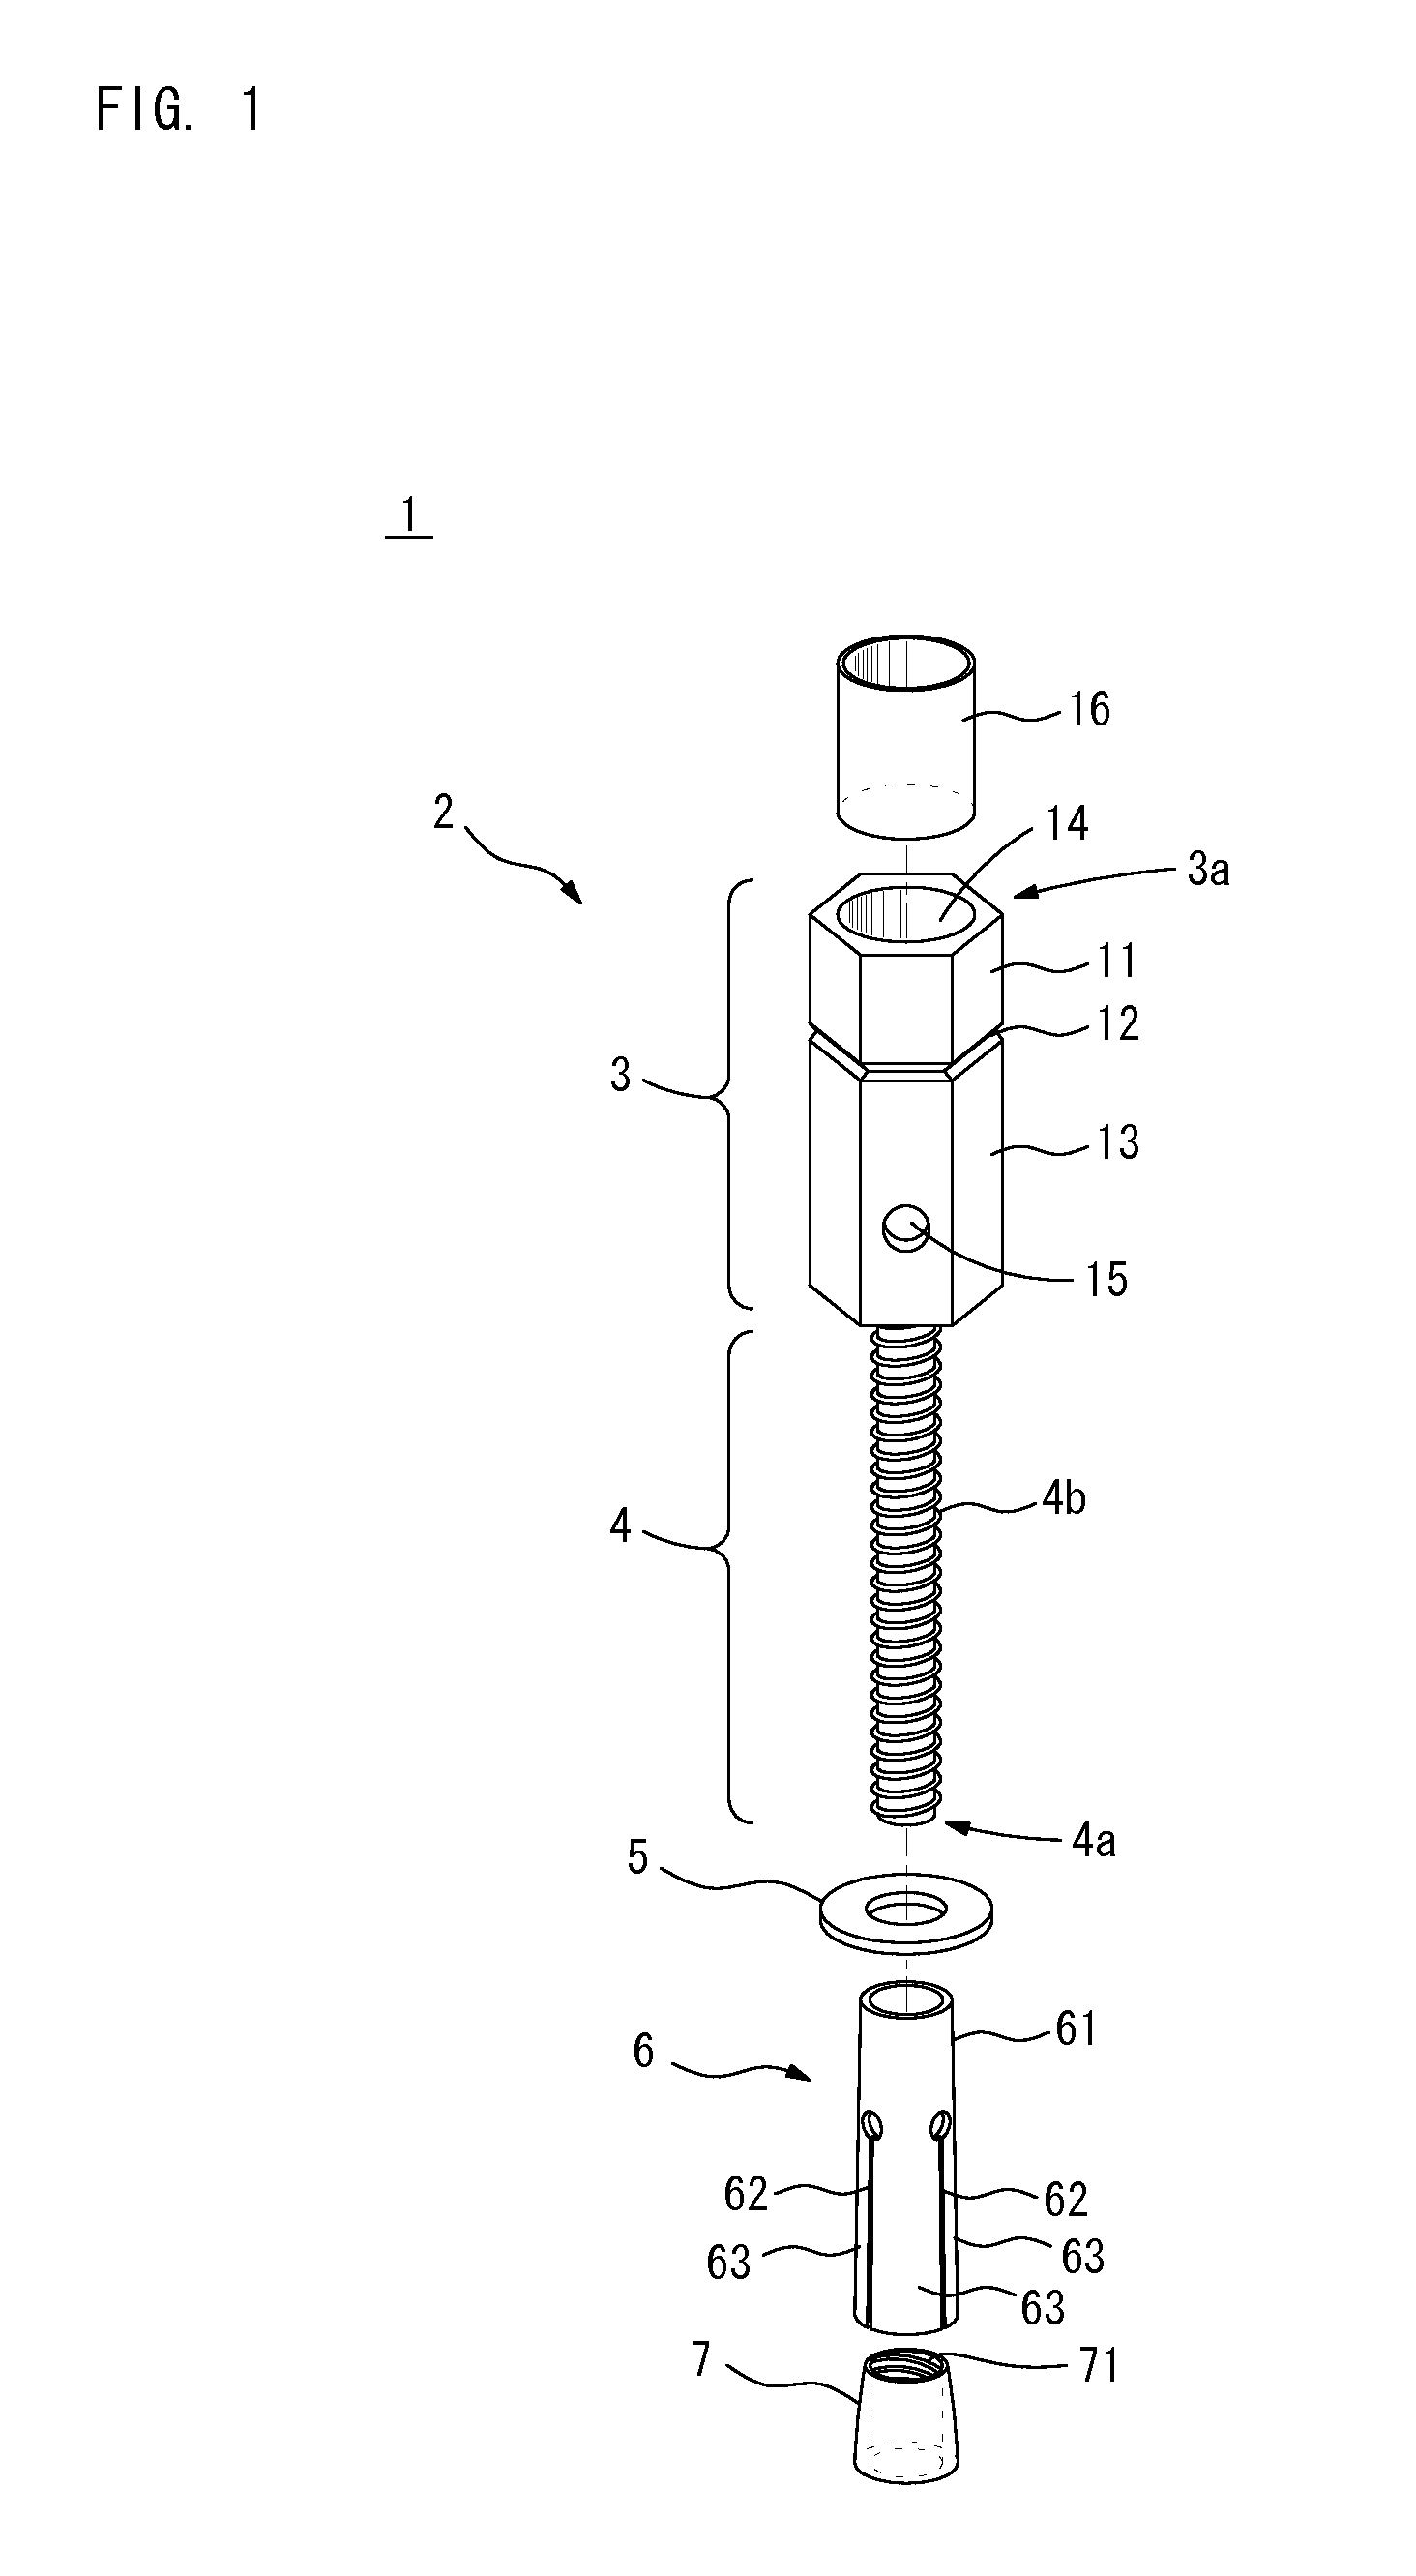 Anchor bolt, anchor, connecting nut and clamping nut